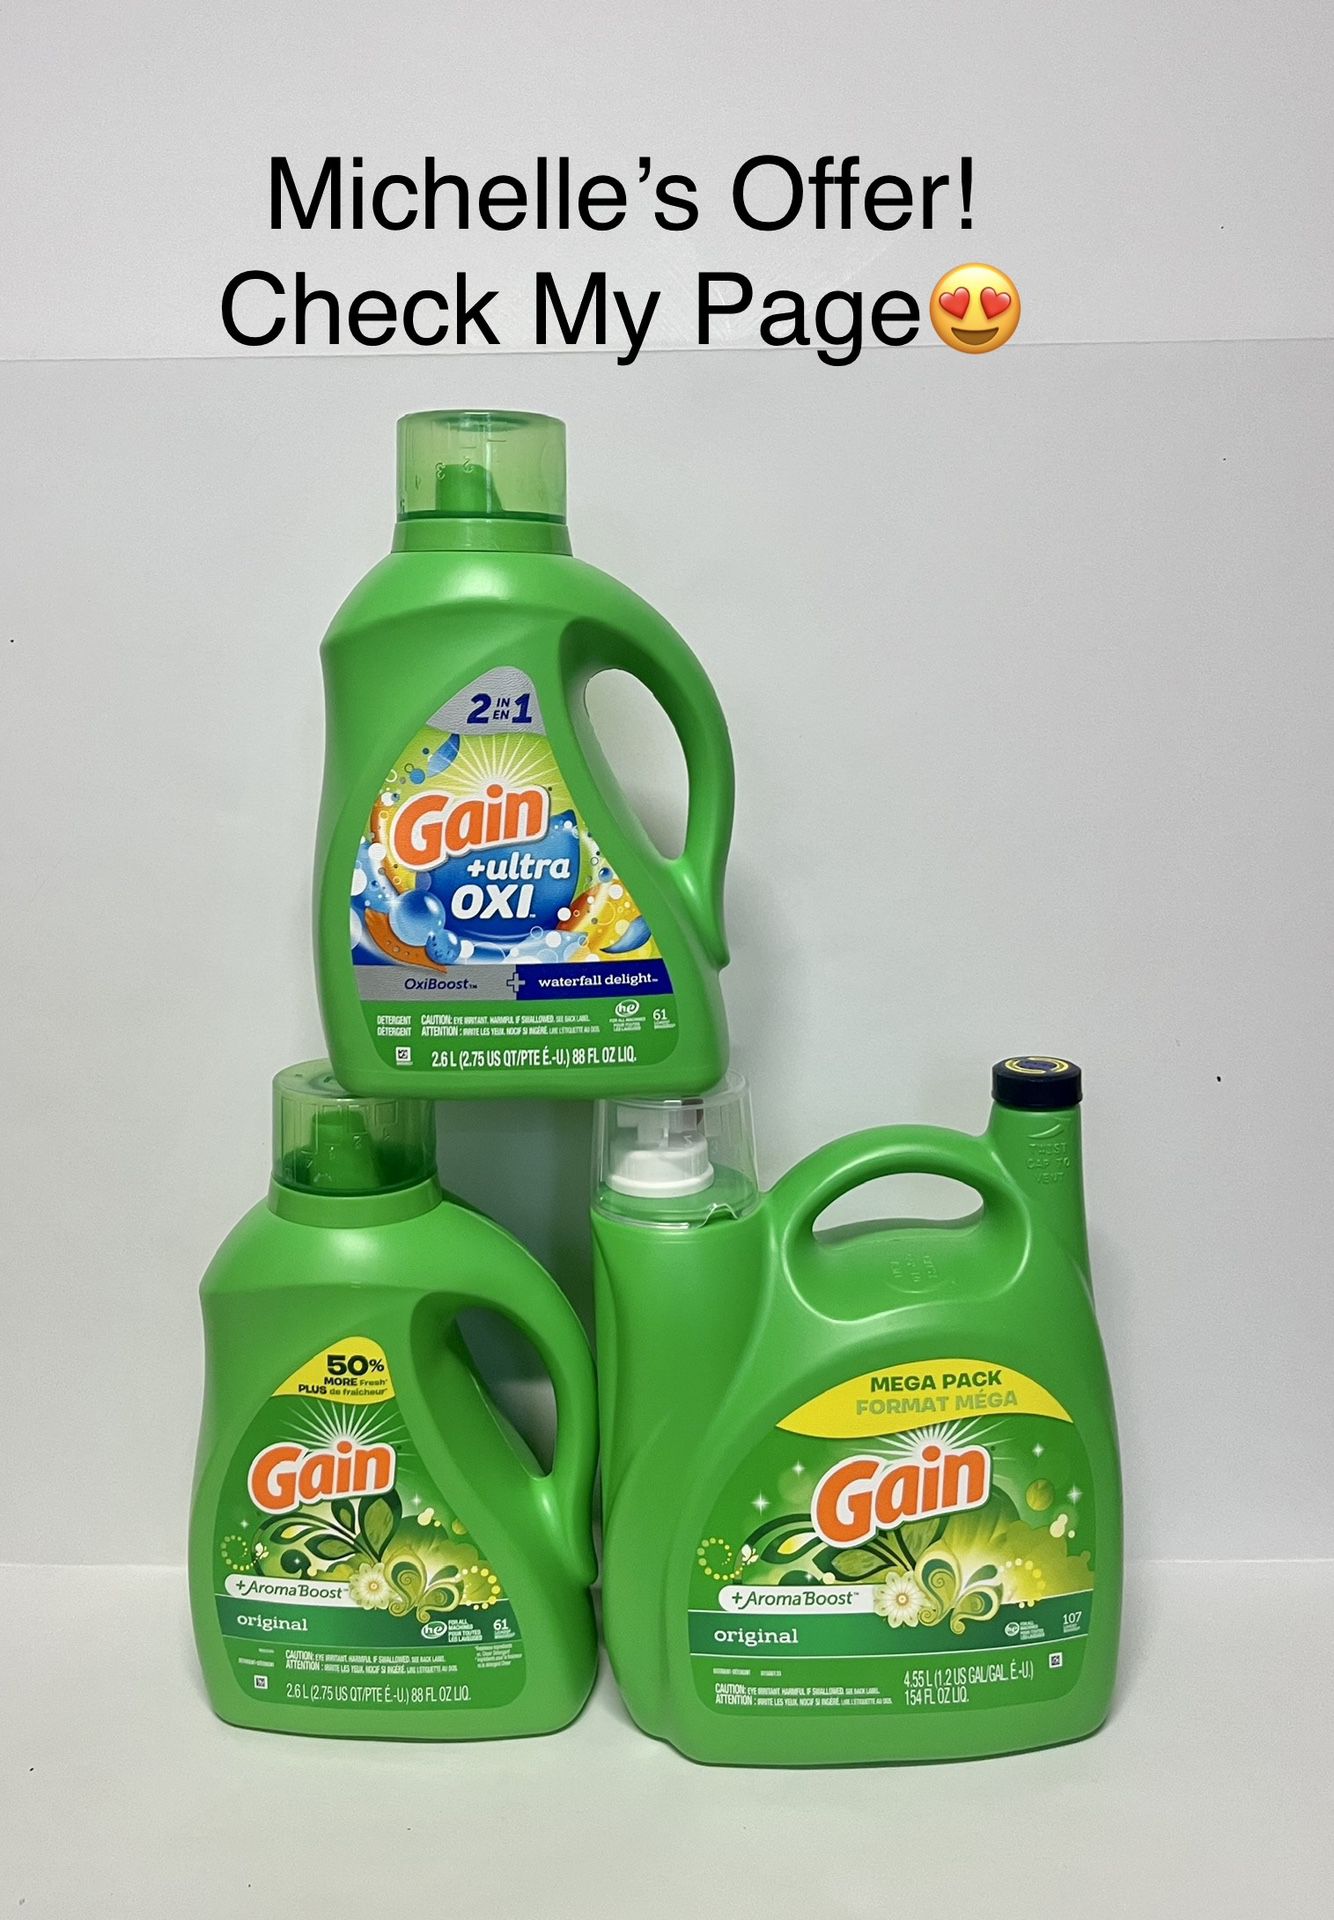 Gain Original With Aromaboost/Gain 2in1 Ultra Oxi Detergent Set